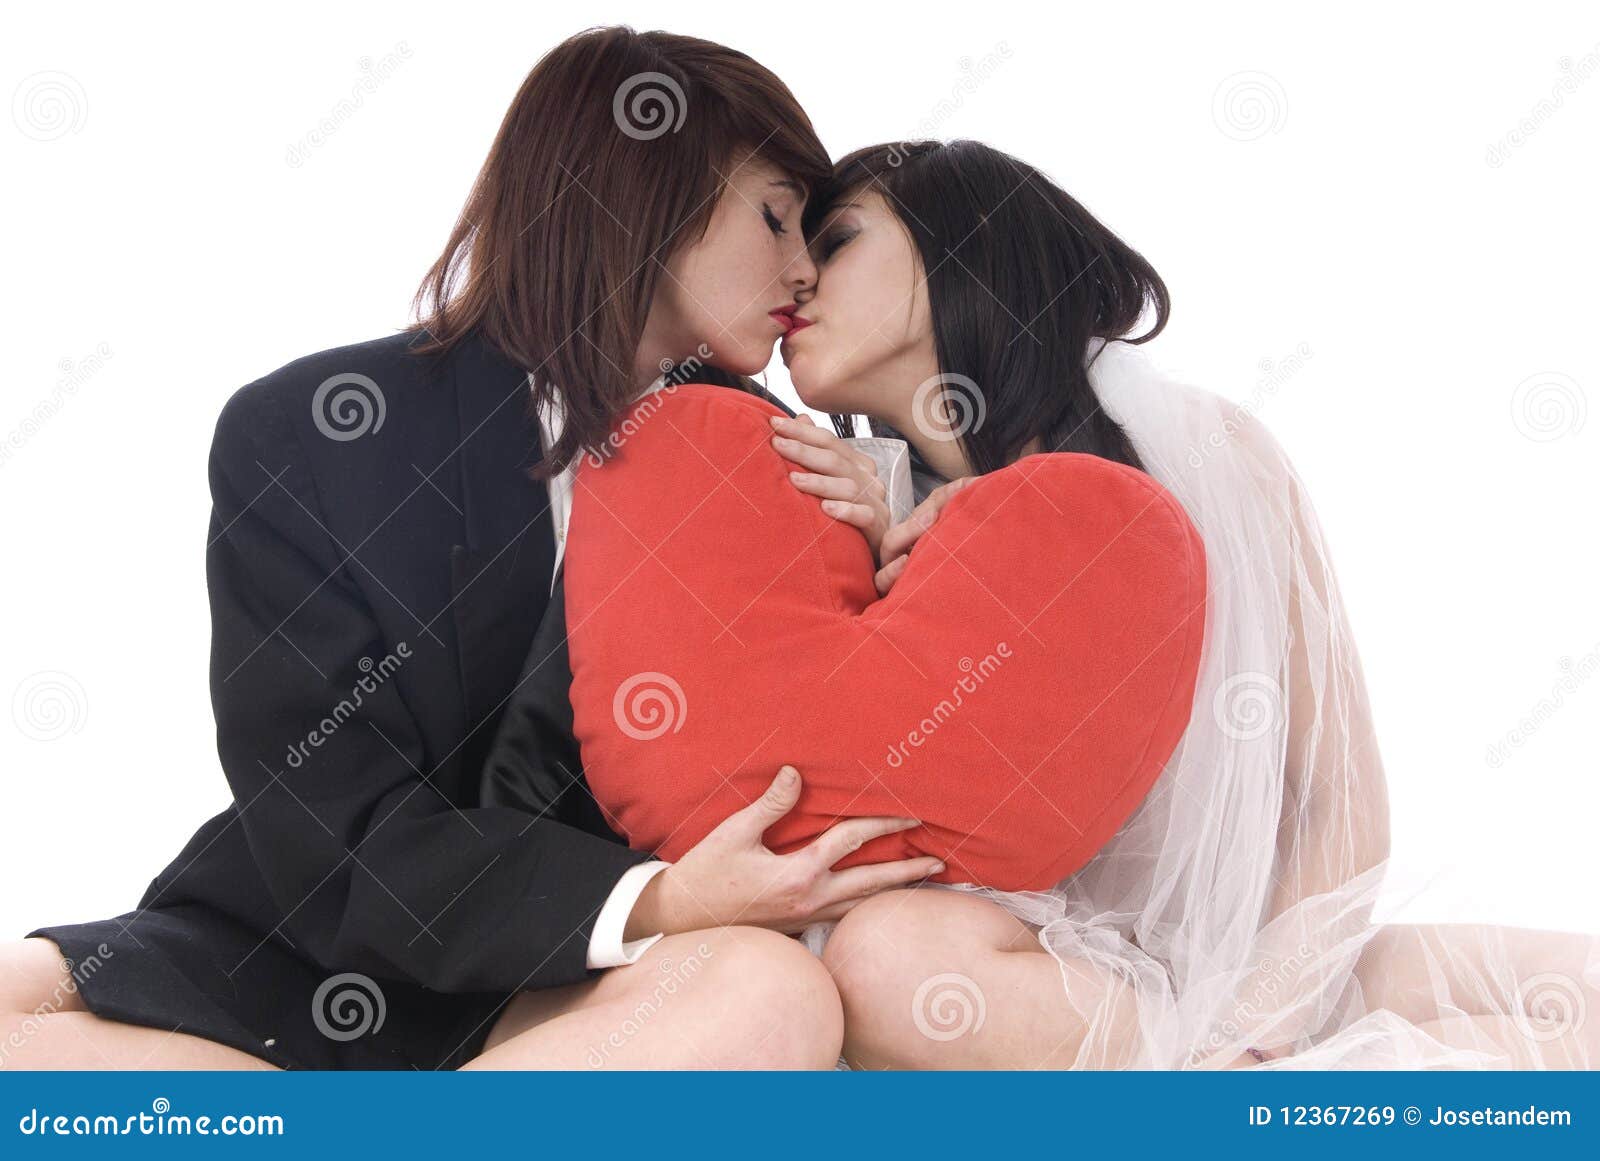 Couple Of Lesbian Woman In Love Royalty Free Stock Images Image 12367269